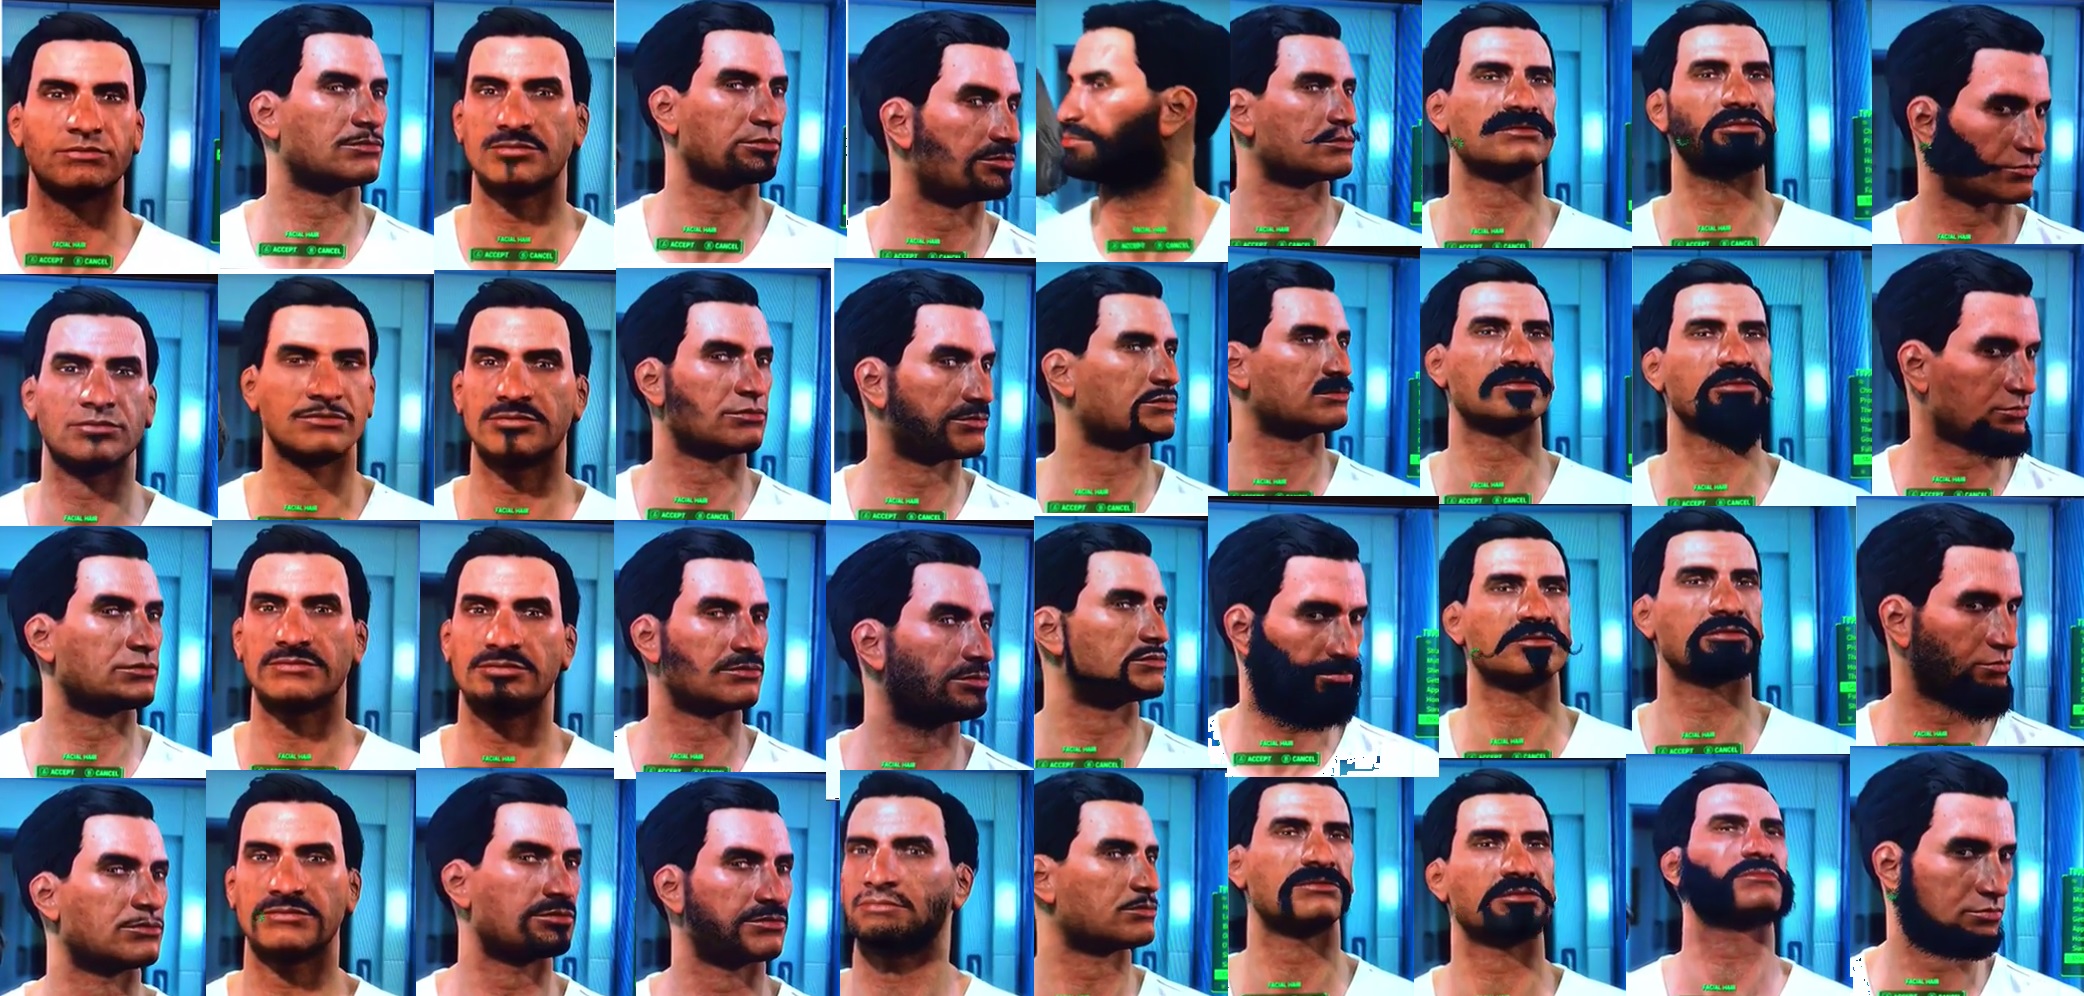 Fallout 4 lots more hairstyles фото 94